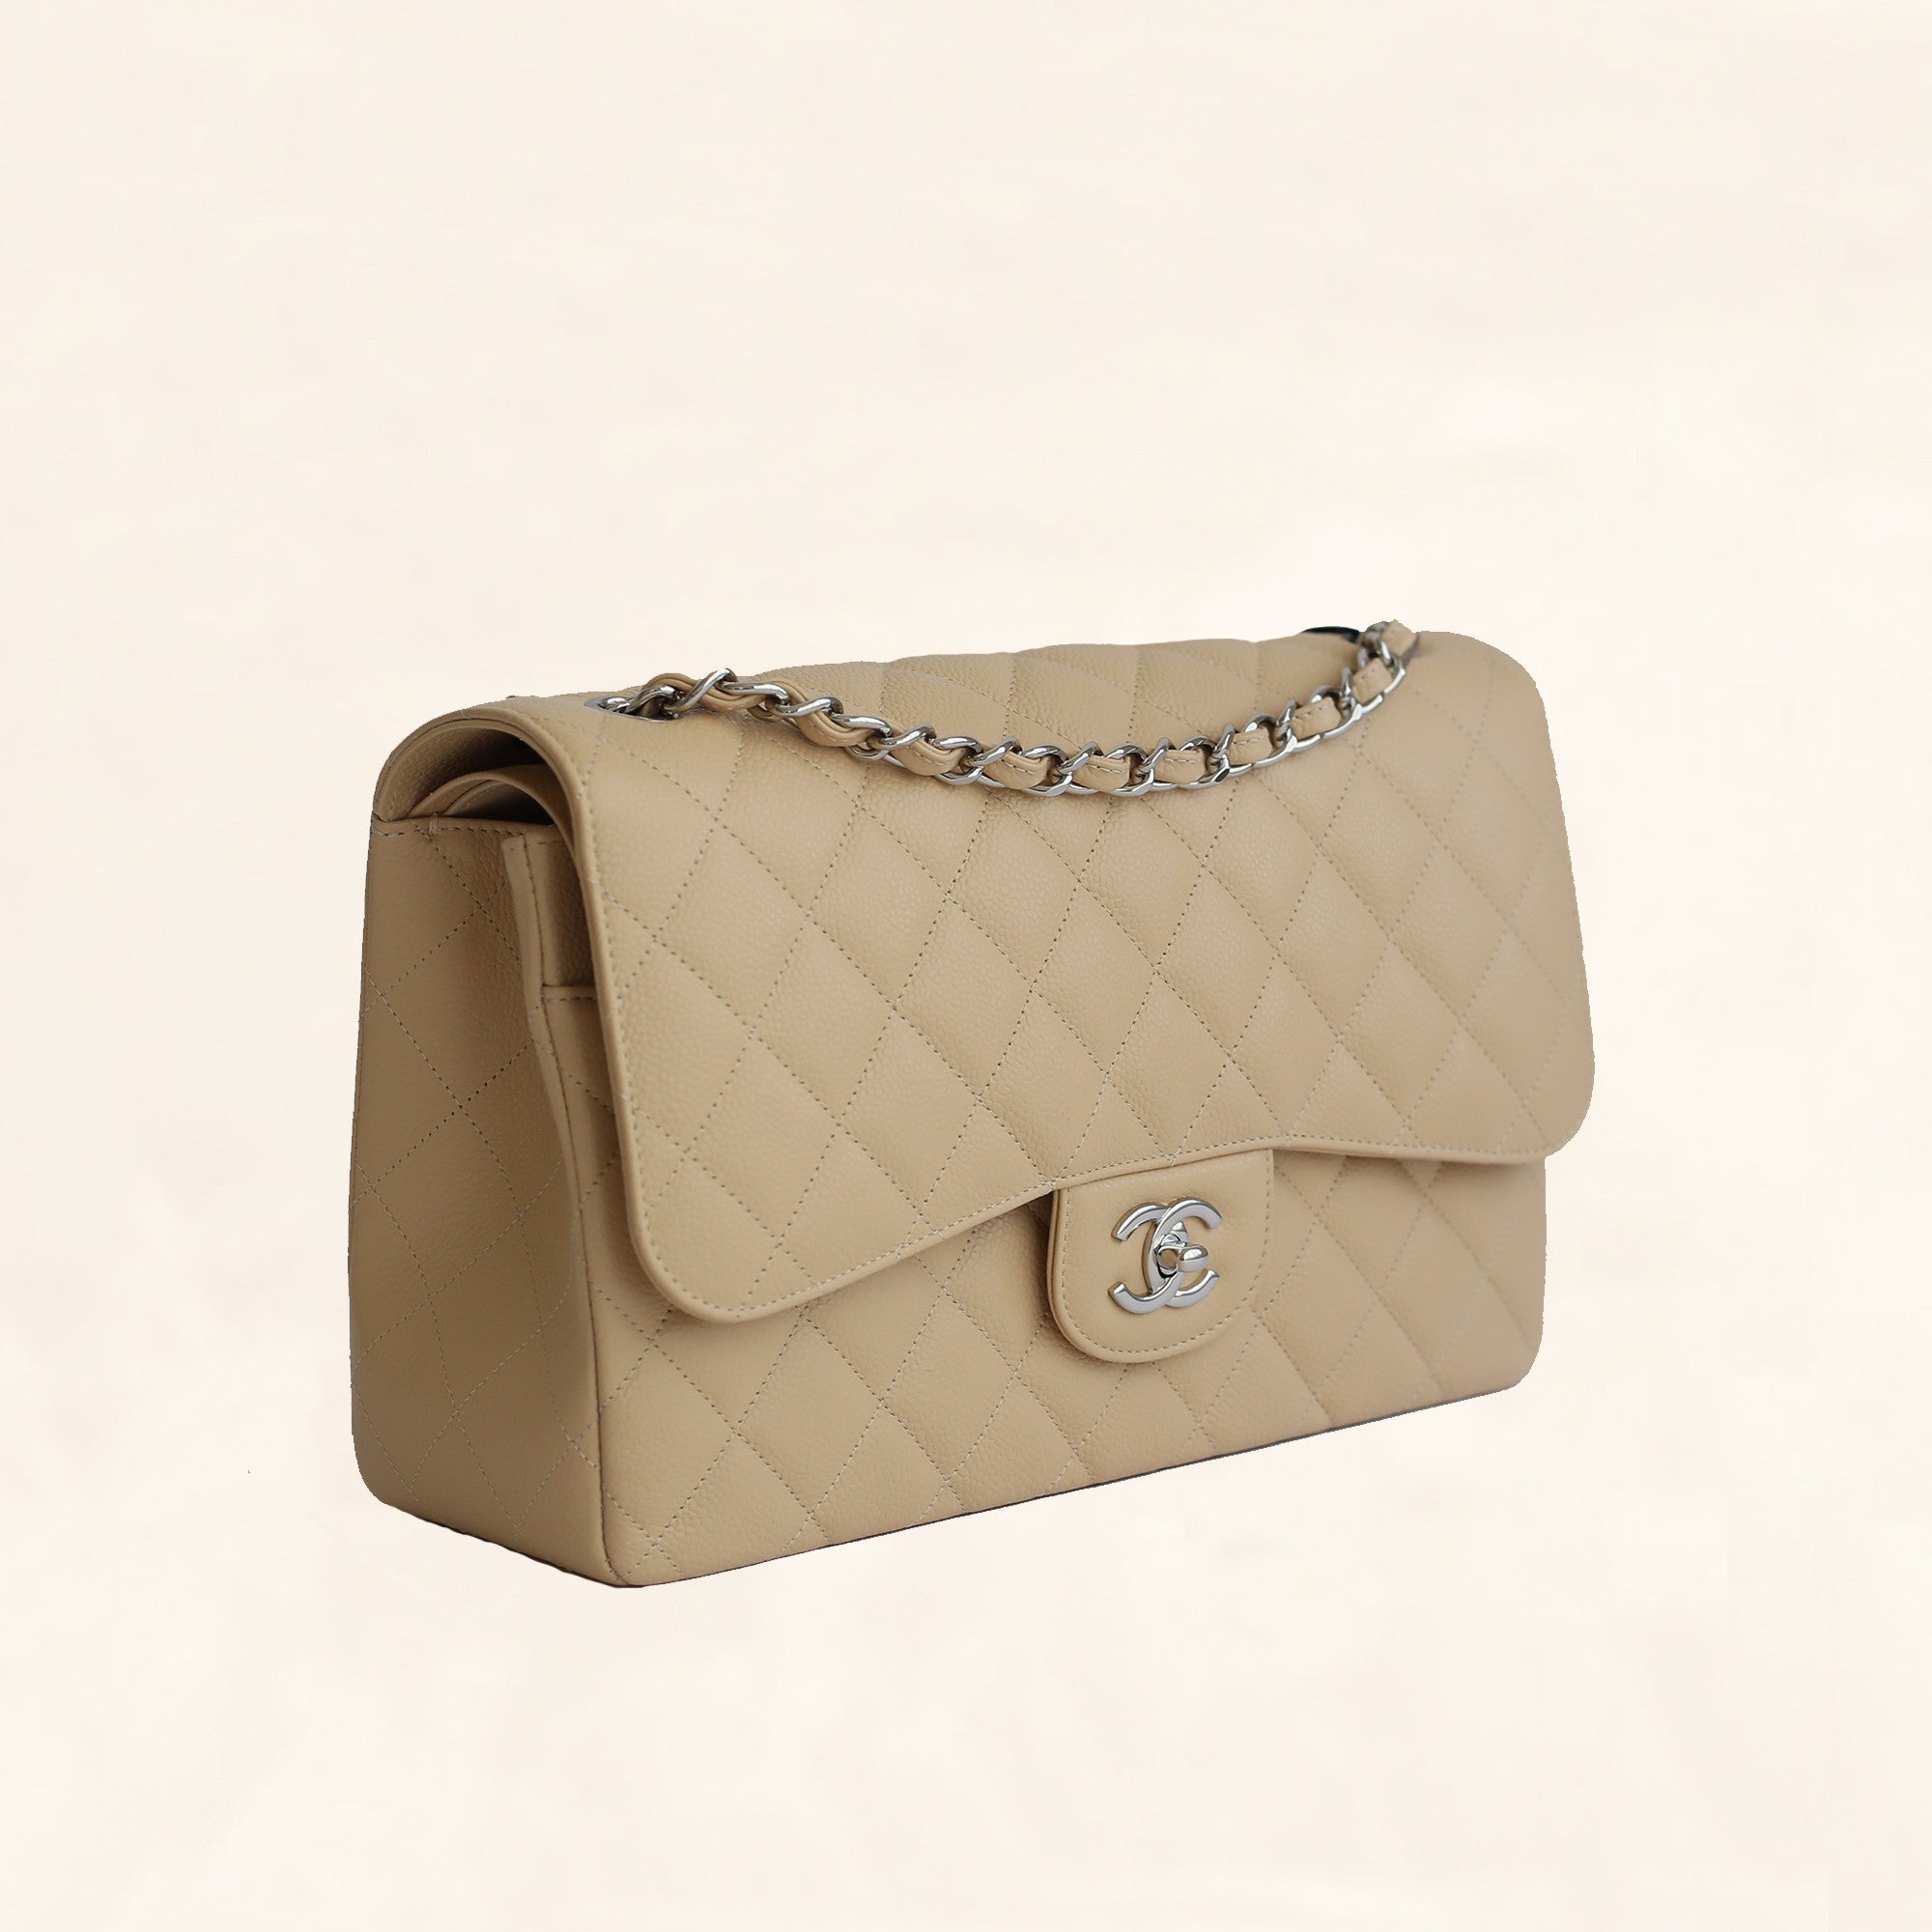 Chanel WhiteBeige Quilted Chevre and Patent Leather Medium Boy Bag   Yoogis Closet